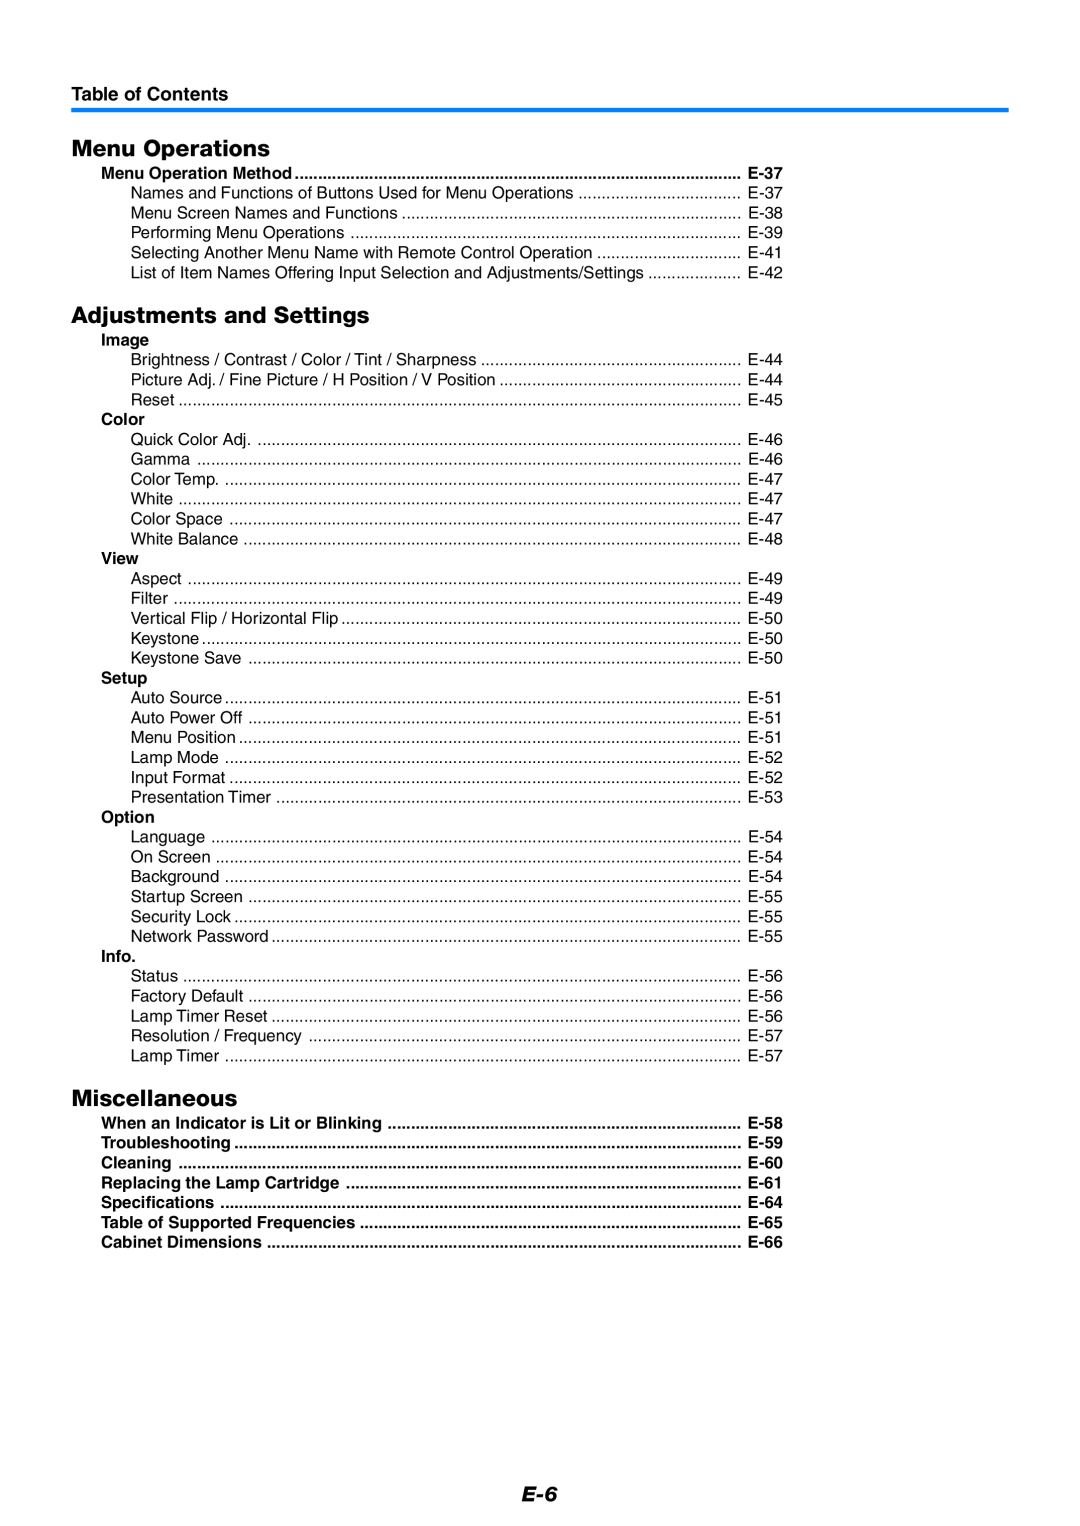 PLUS Vision U7-137, U7-132h user manual Menu Operations, Adjustments and Settings, Miscellaneous, Table of Contents 